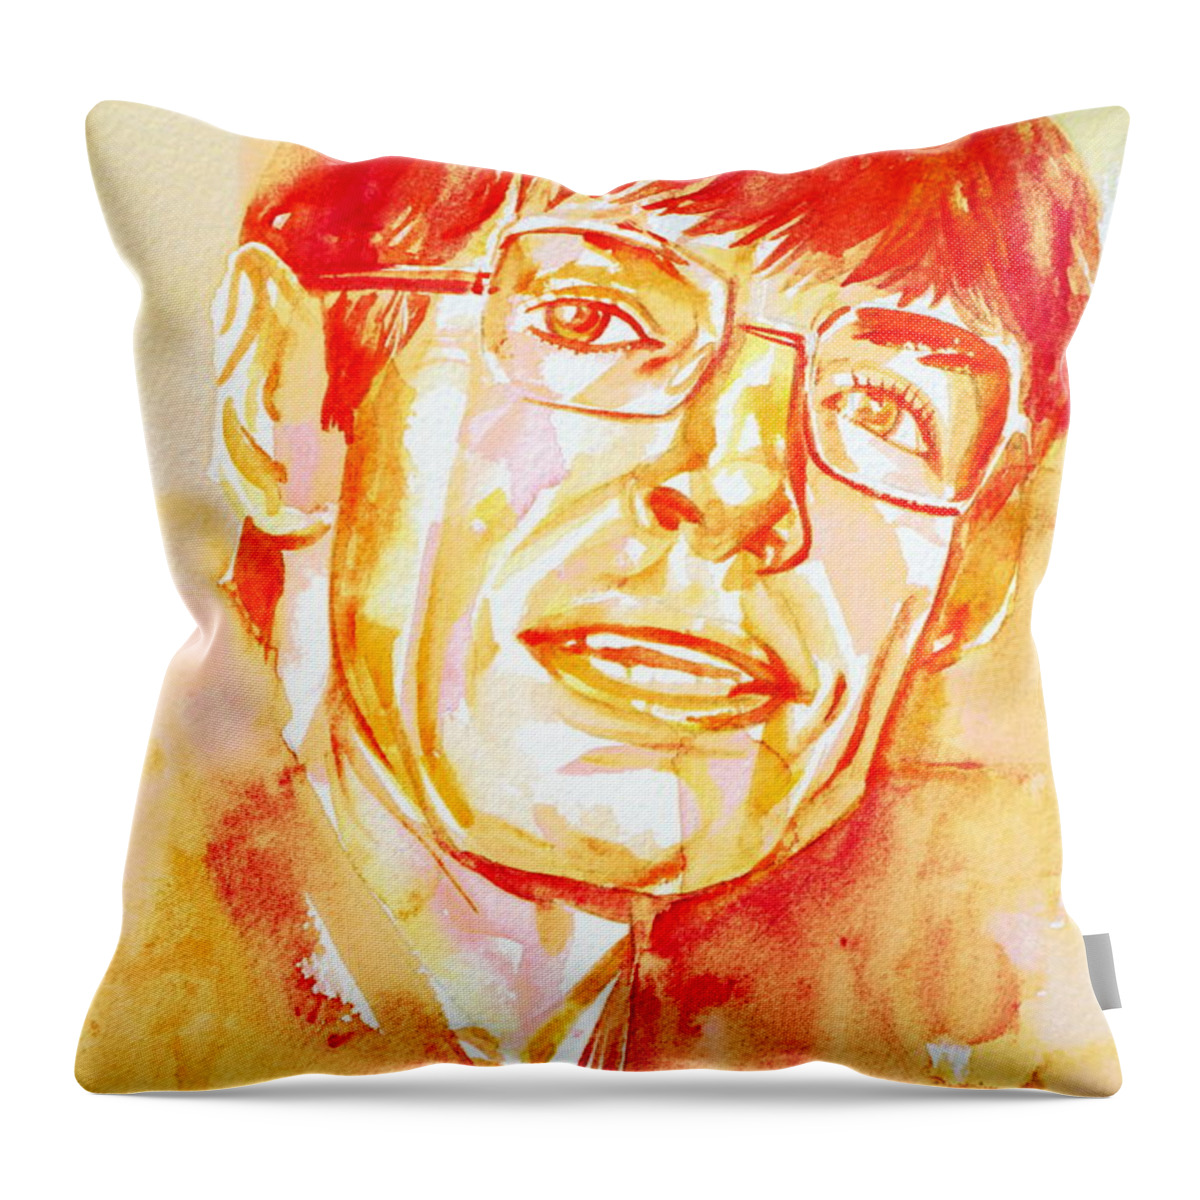 Stephen Throw Pillow featuring the painting STEPHEN HAWKING portrait by Fabrizio Cassetta